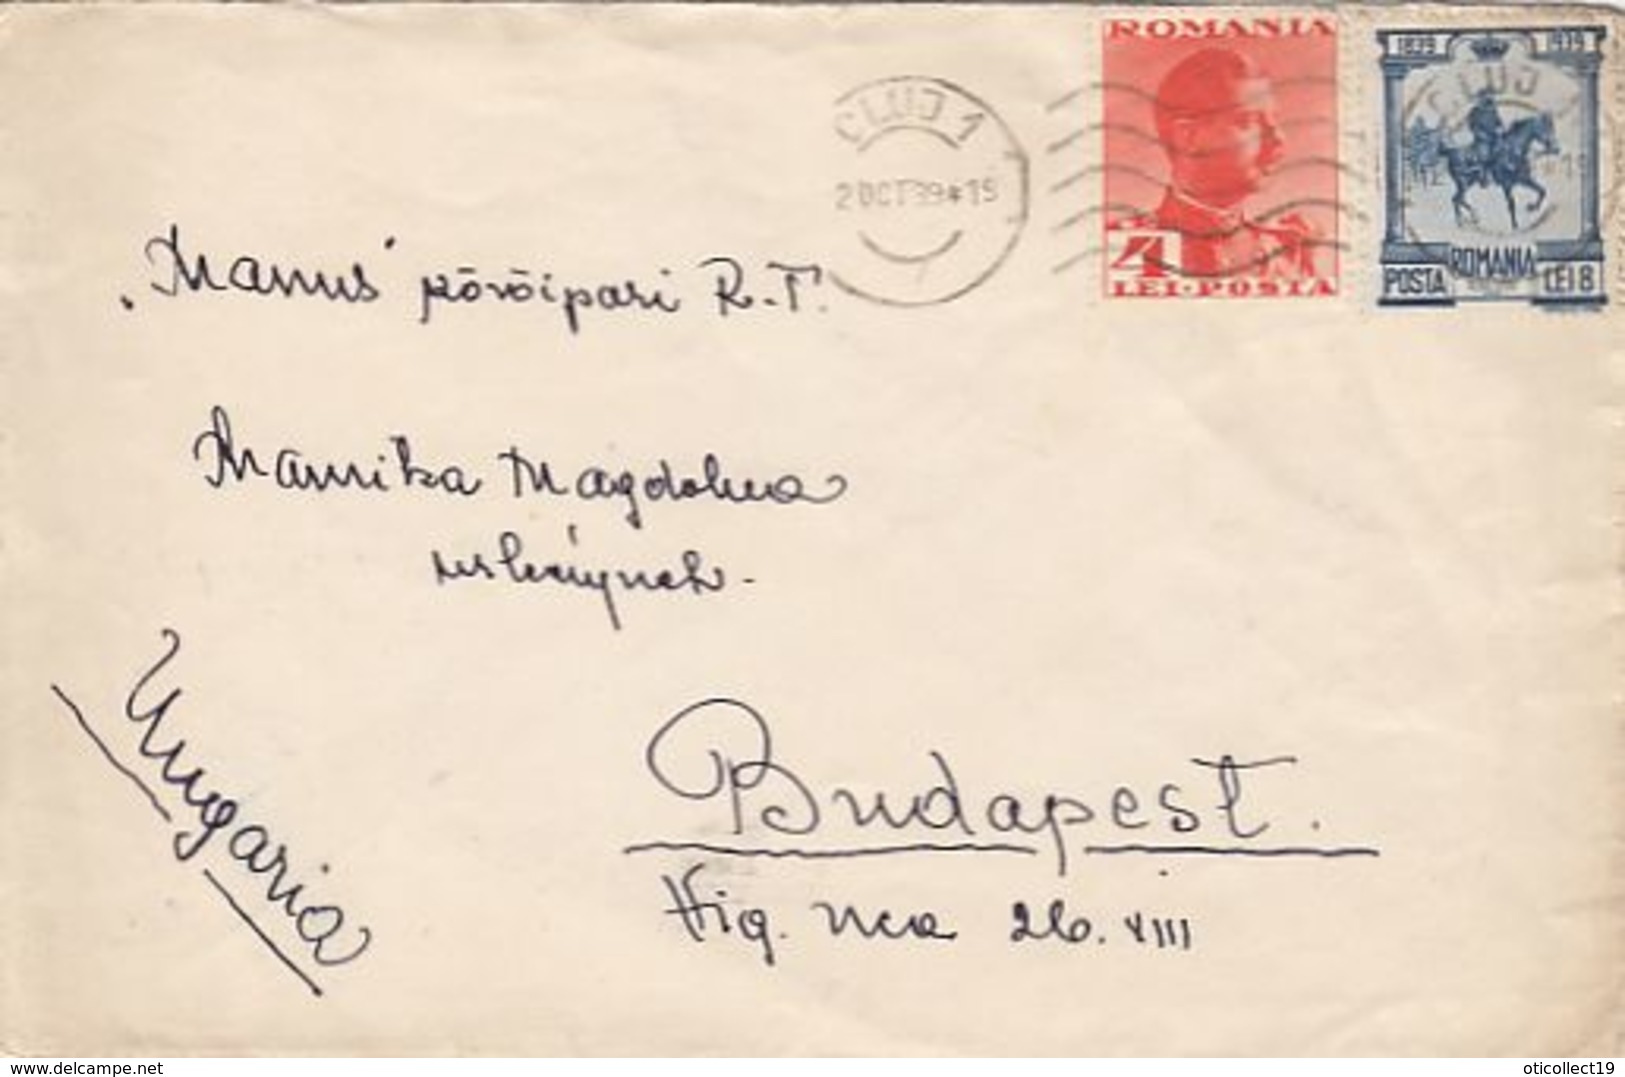 KING CHARLES 2ND, KING CHARLES 1ST, STAMPS ON COVER, 1939, ROMANIA - Storia Postale